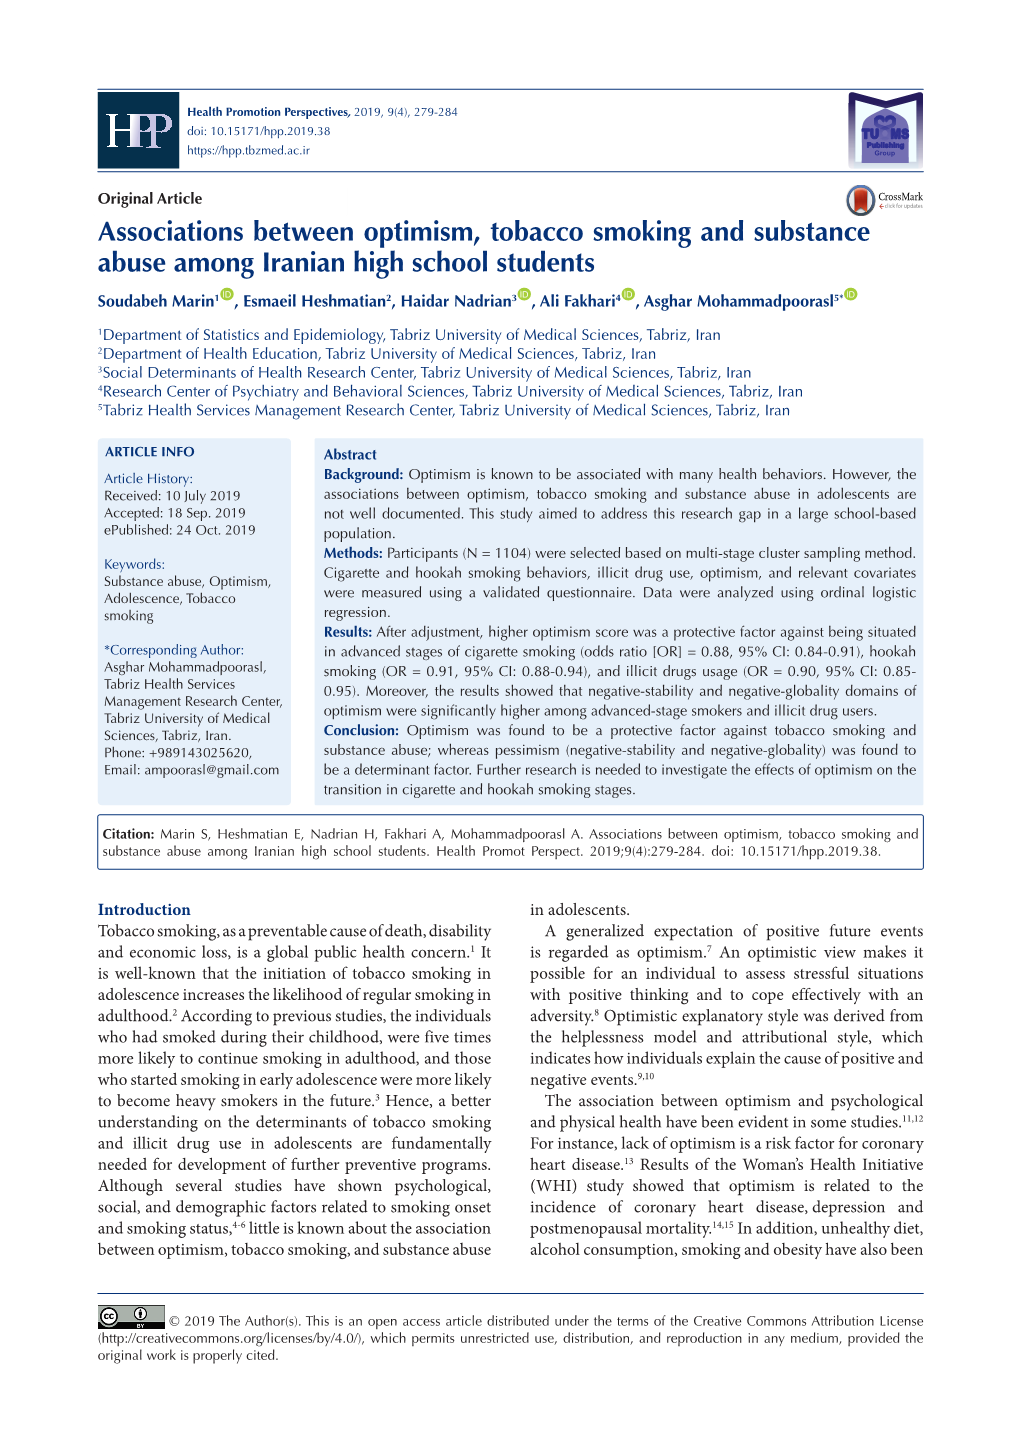 Associations Between Optimism, Tobacco Smoking and Substance